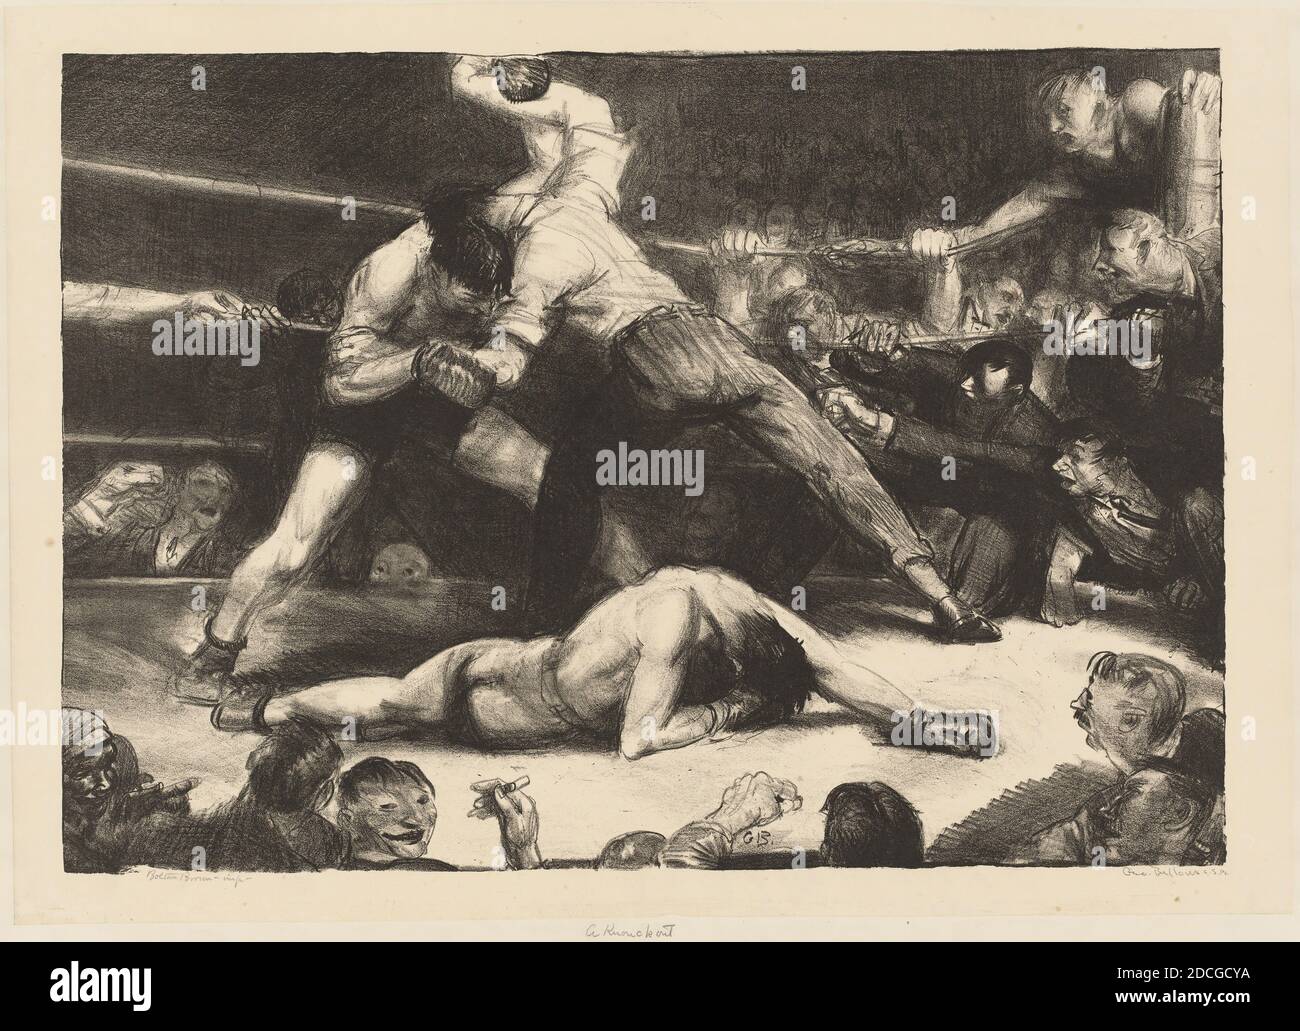 George Bellows, (artist), American, 1882 - 1925, A Knockout, 1921, lithograph in black, image: 38.74 × 55.25 cm (15 1/4 × 21 3/4 in Stock Photo